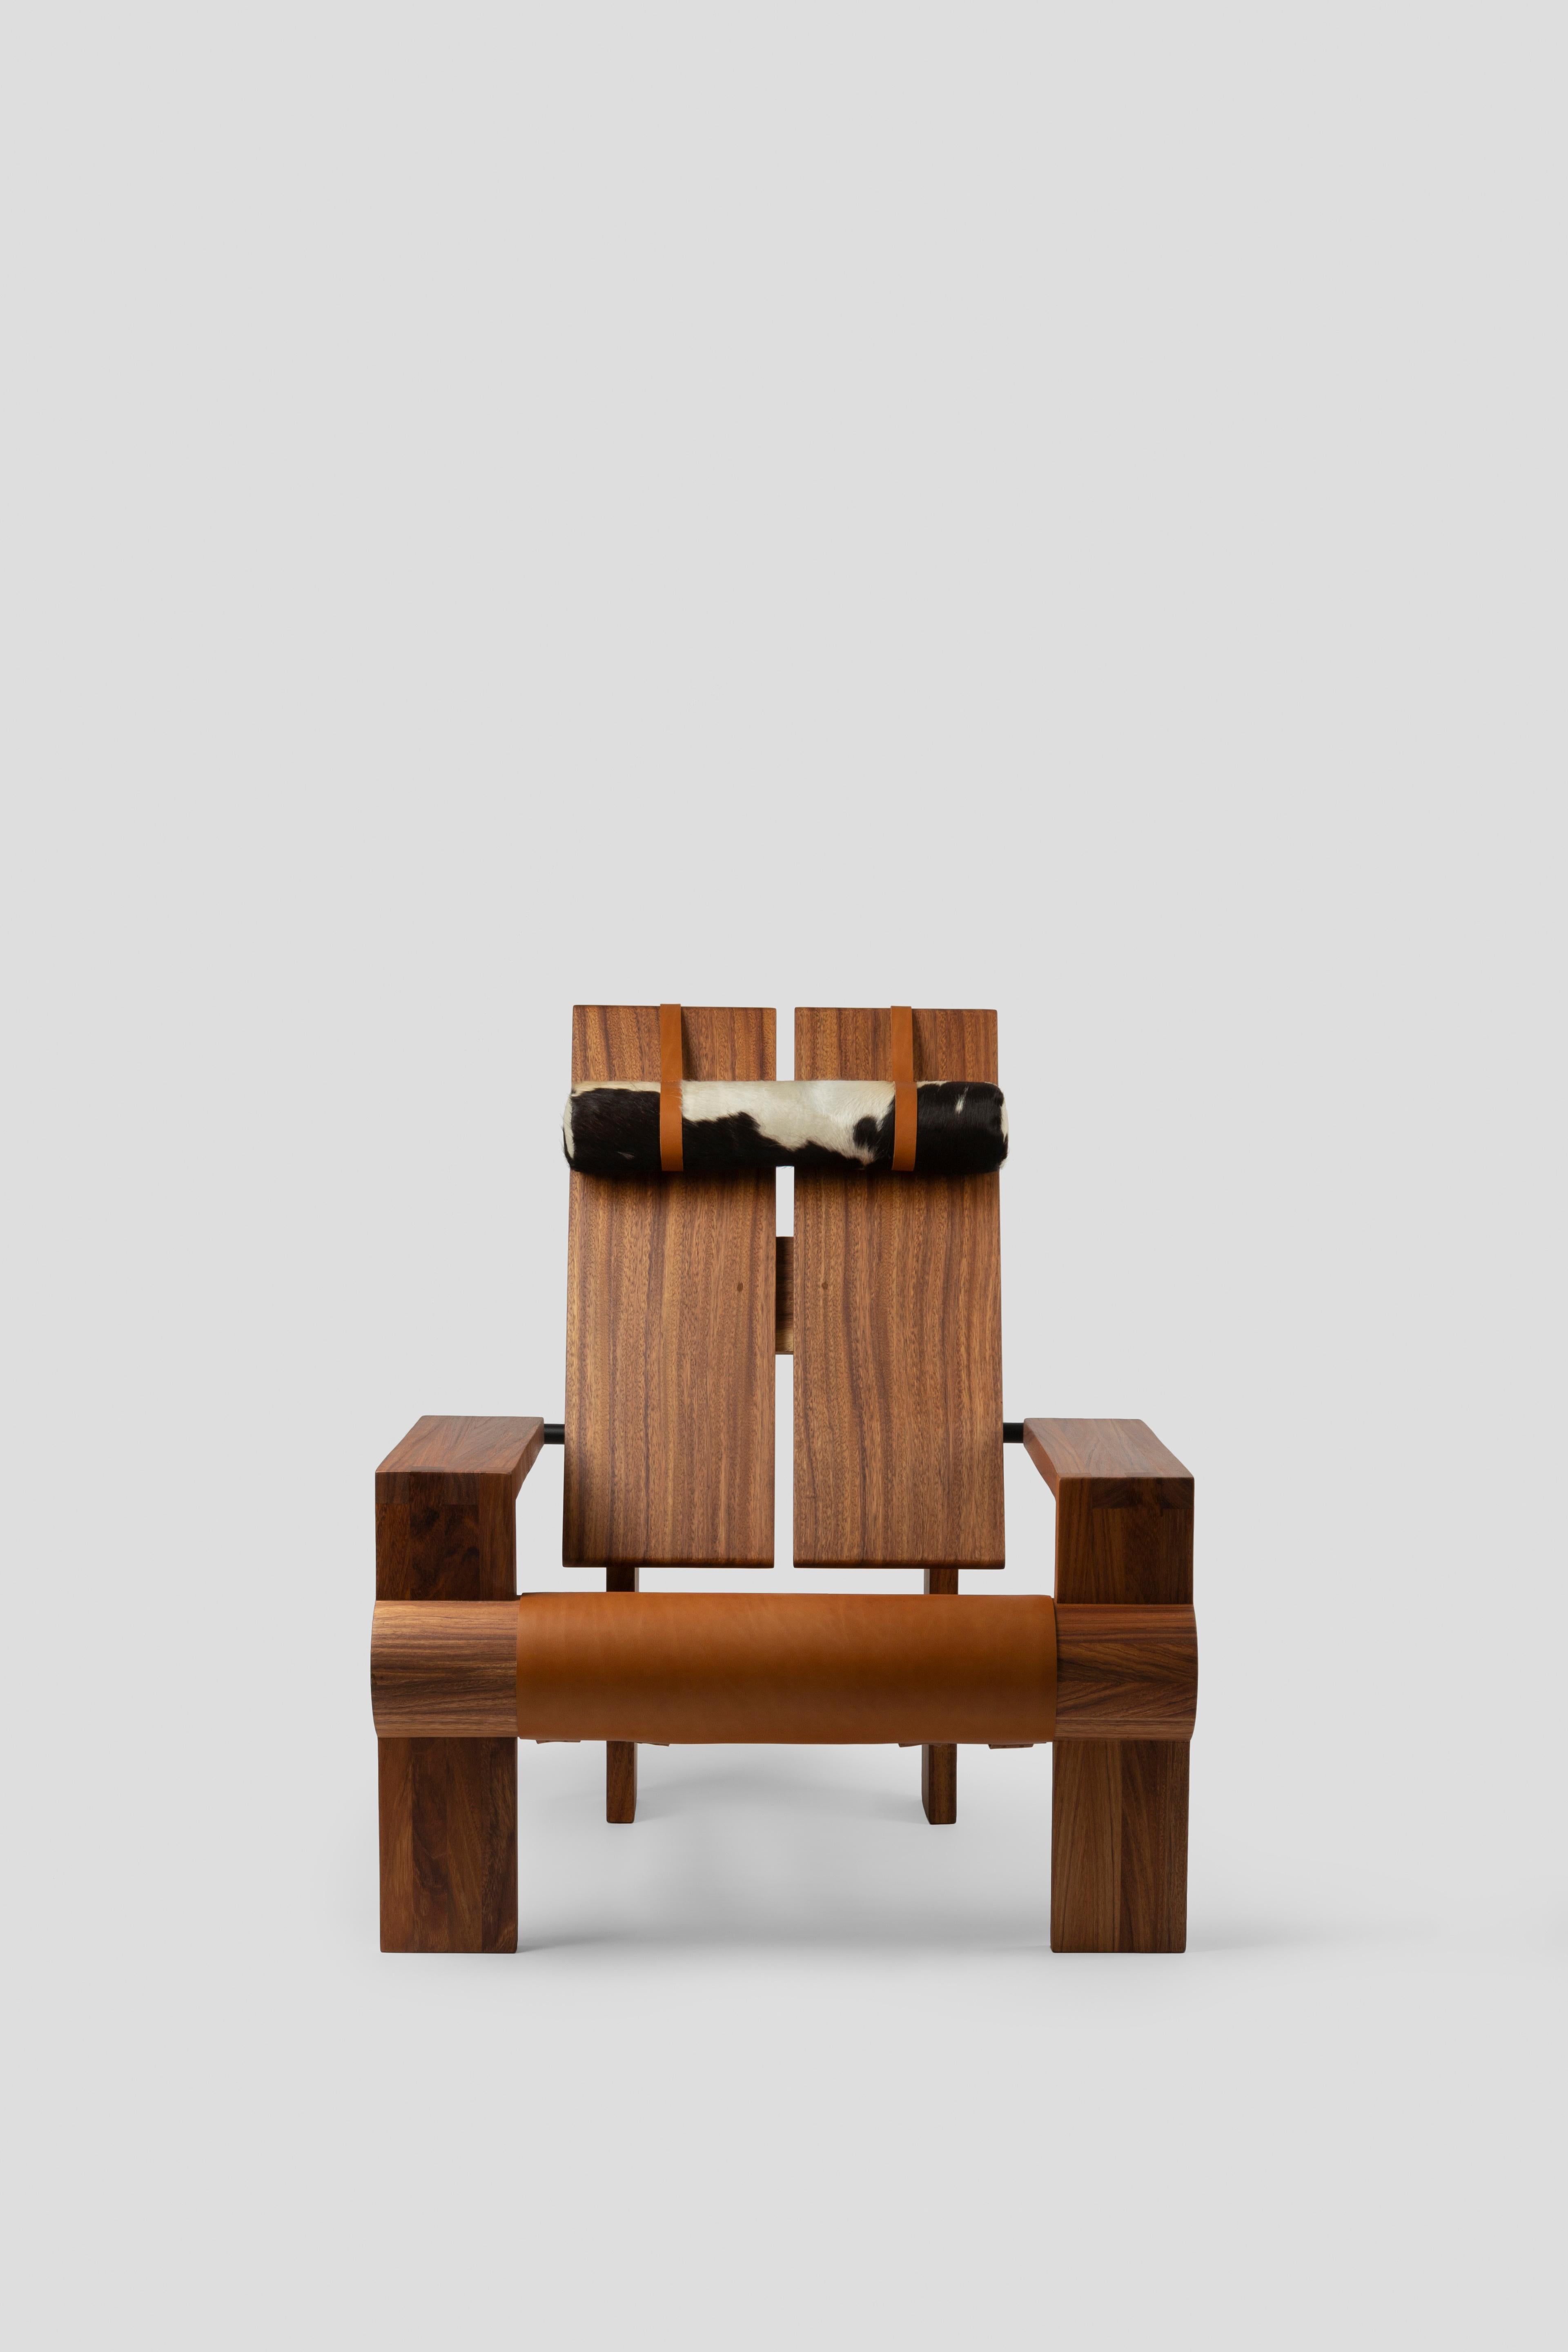 Inspired by the classic Adirondack Chair, an iconic American piece often used on porches and patios, this chair was designed upon request from a client for a residence in Healdsburg, California. 
Our starting point was an abstraction of the original